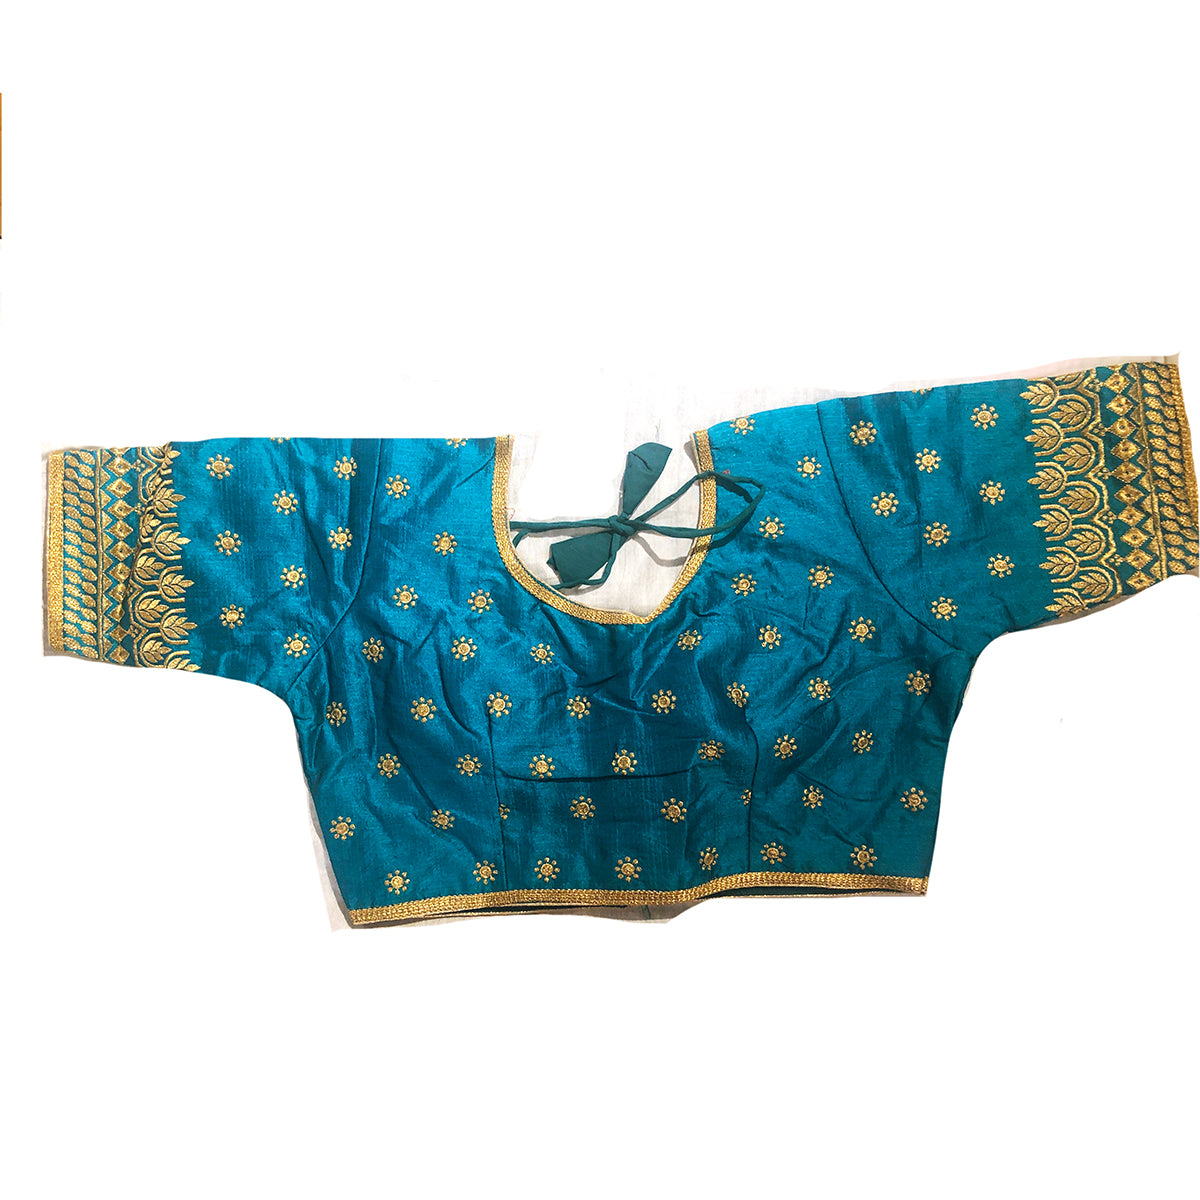 IE Teal Choli Blouse-Gold Stars - Vintage India NYC